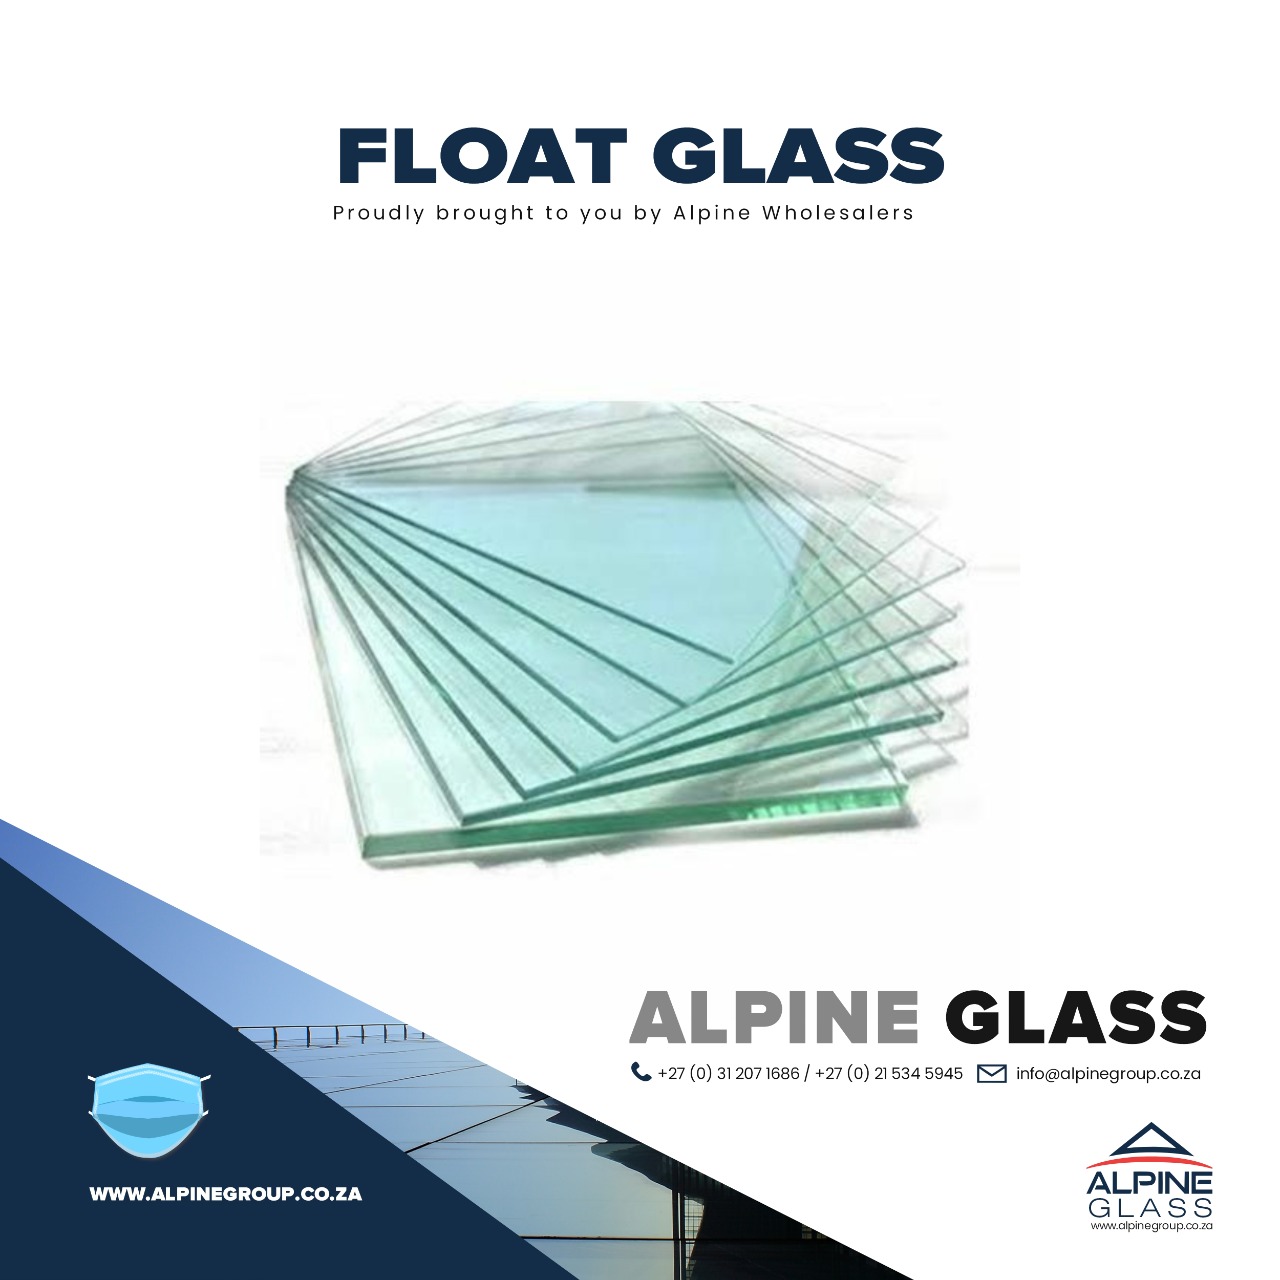 Mirror, Reflective glass, Laminated glass, Clear glass